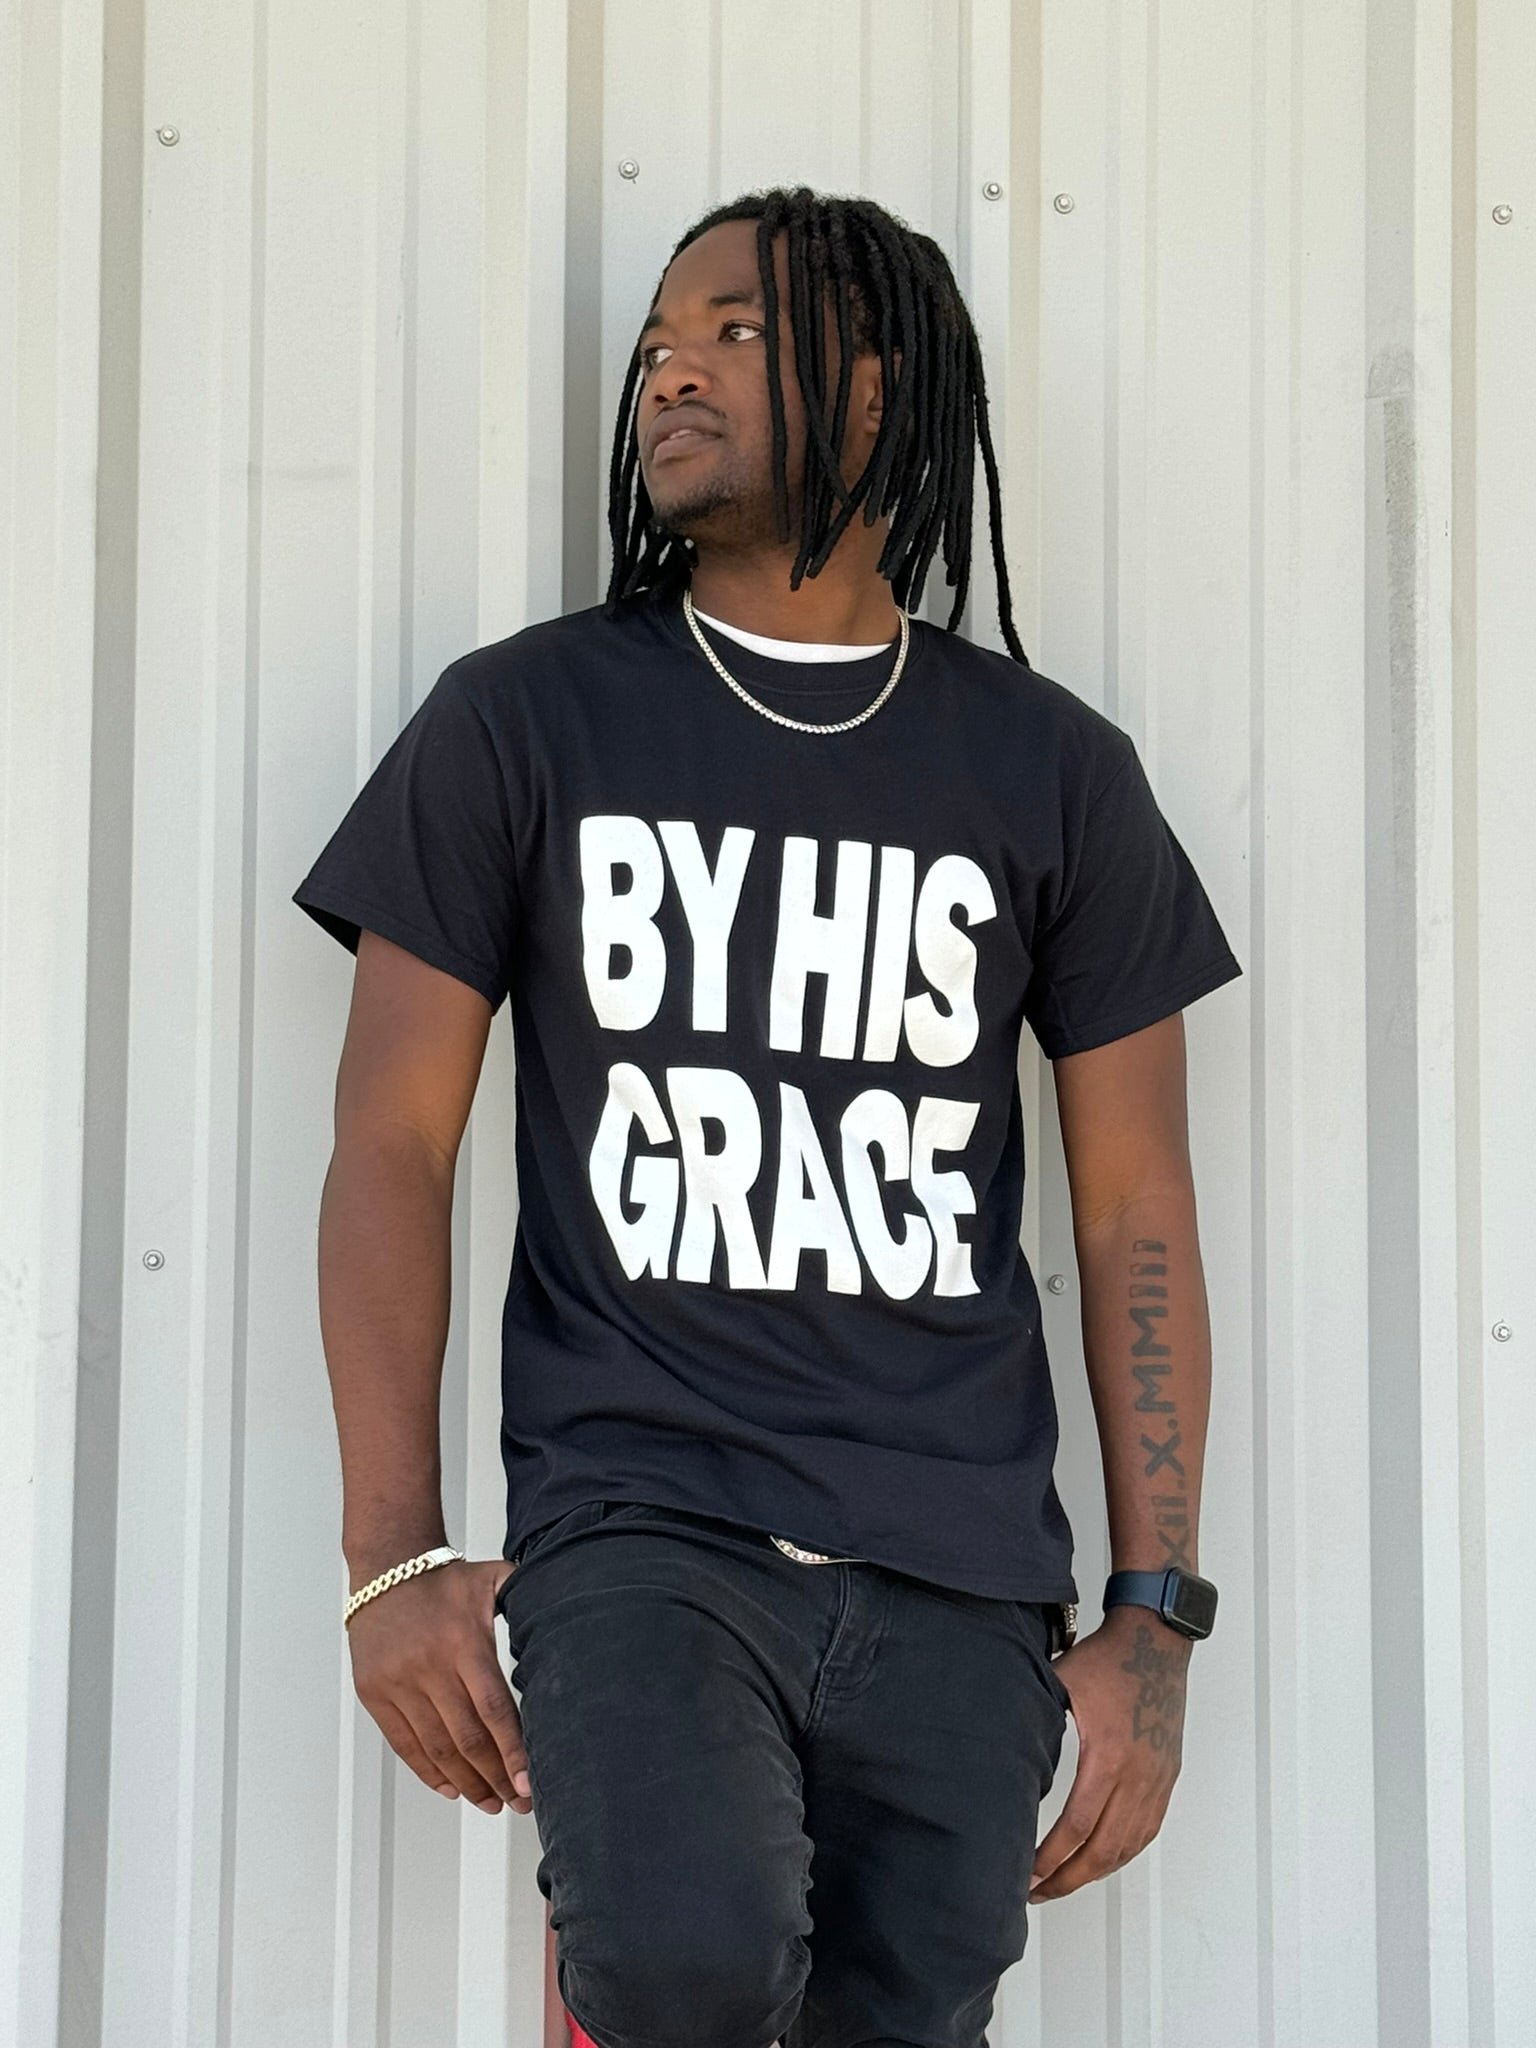 "By His Grace" Tee - Blk/Wht SS